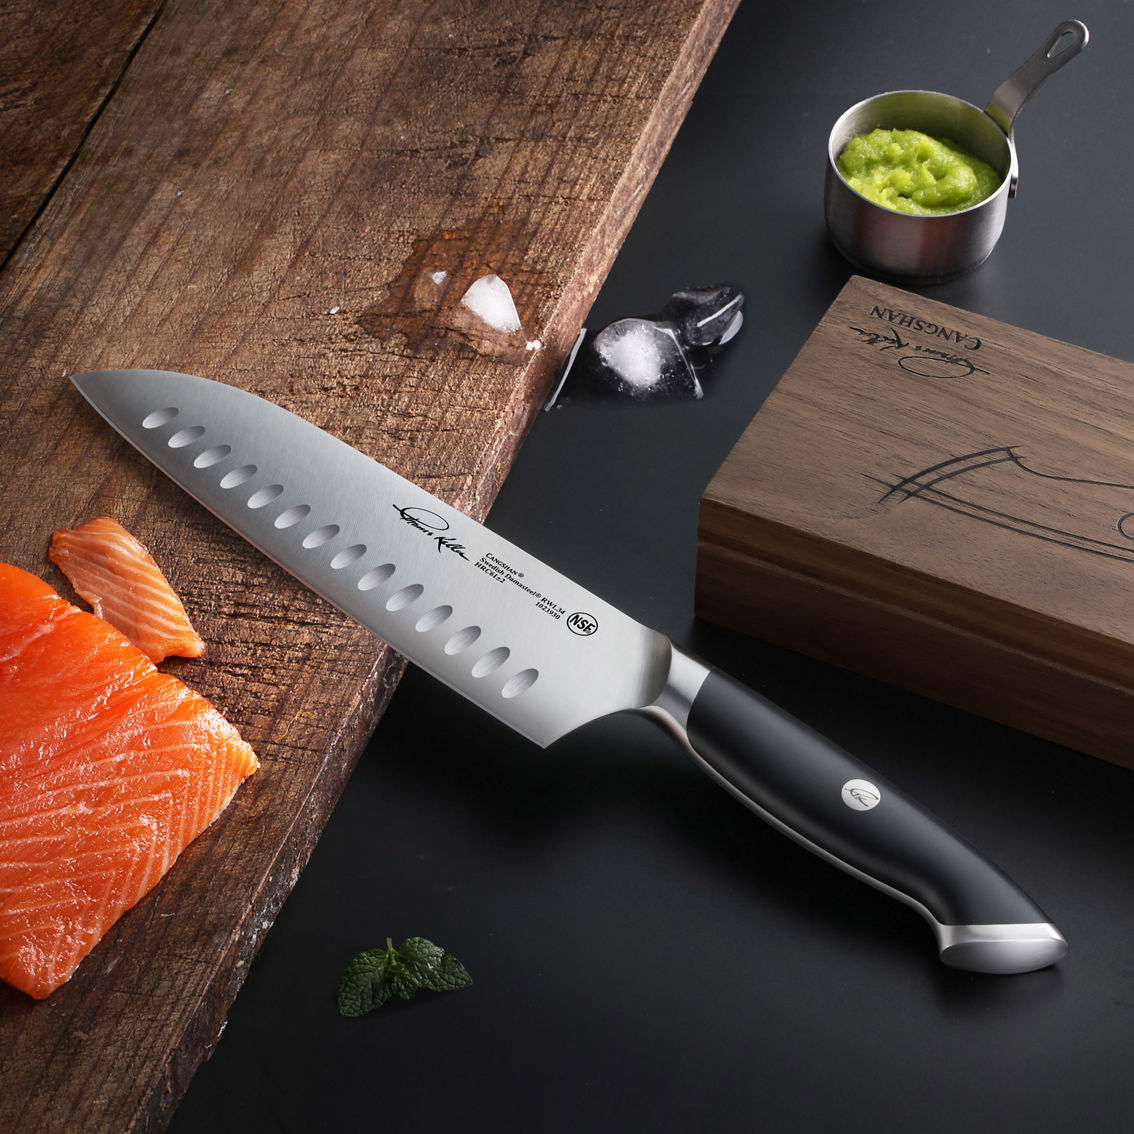 Cangshan Thomas Keller Signature Collection knife set review - Reviewed